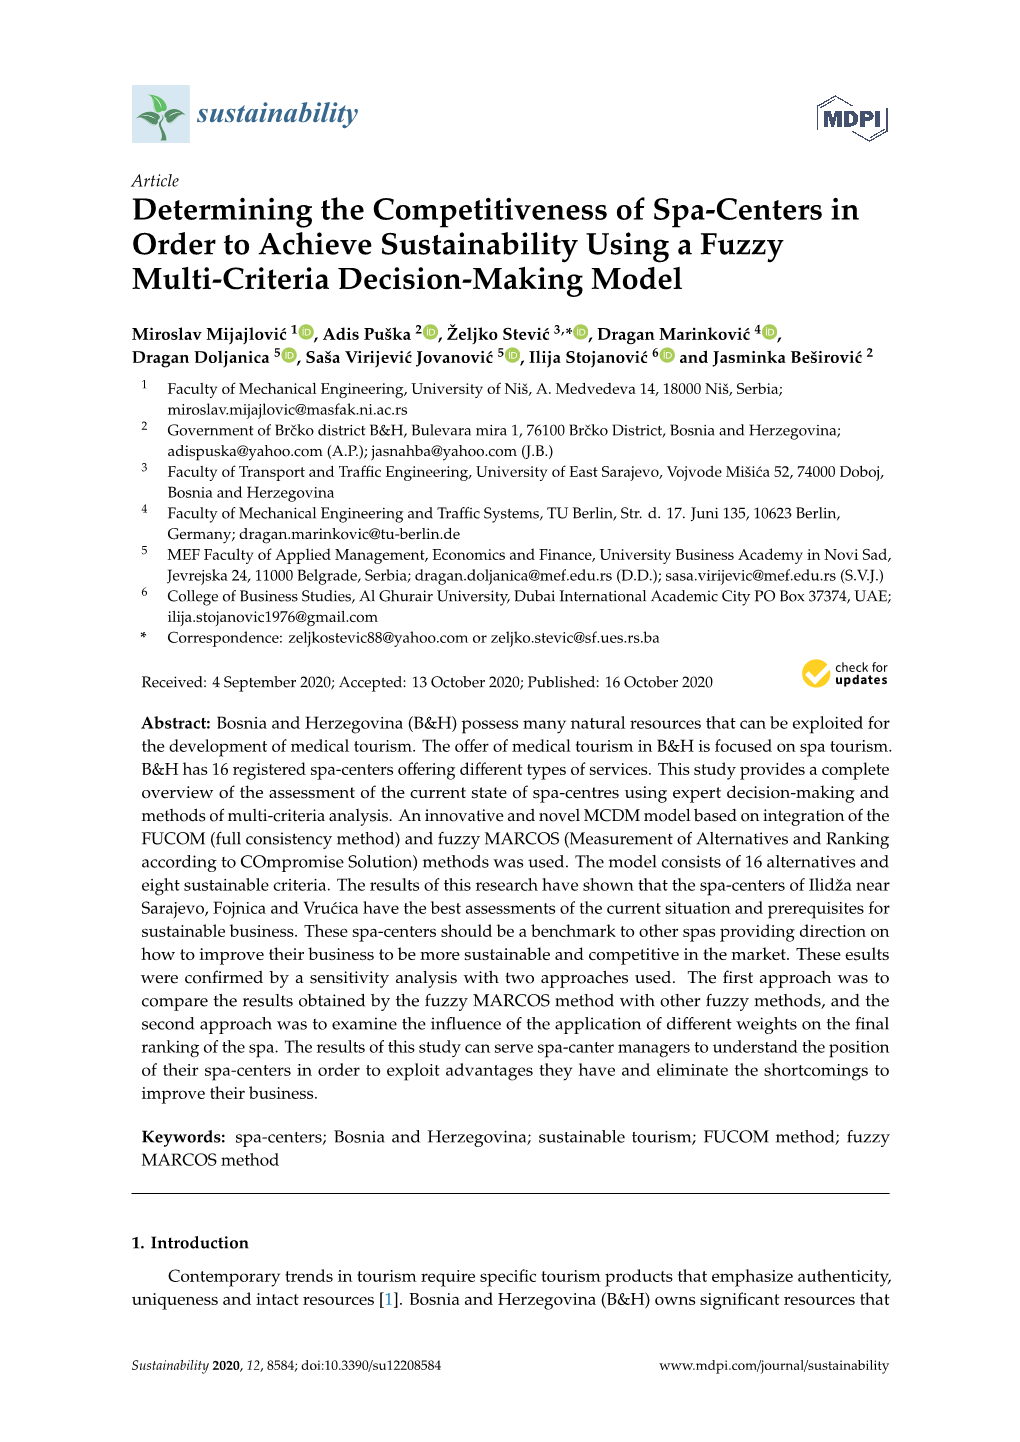 Determining the Competitiveness of Spa-Centers in Order to Achieve Sustainability Using a Fuzzy Multi-Criteria Decision-Making Model